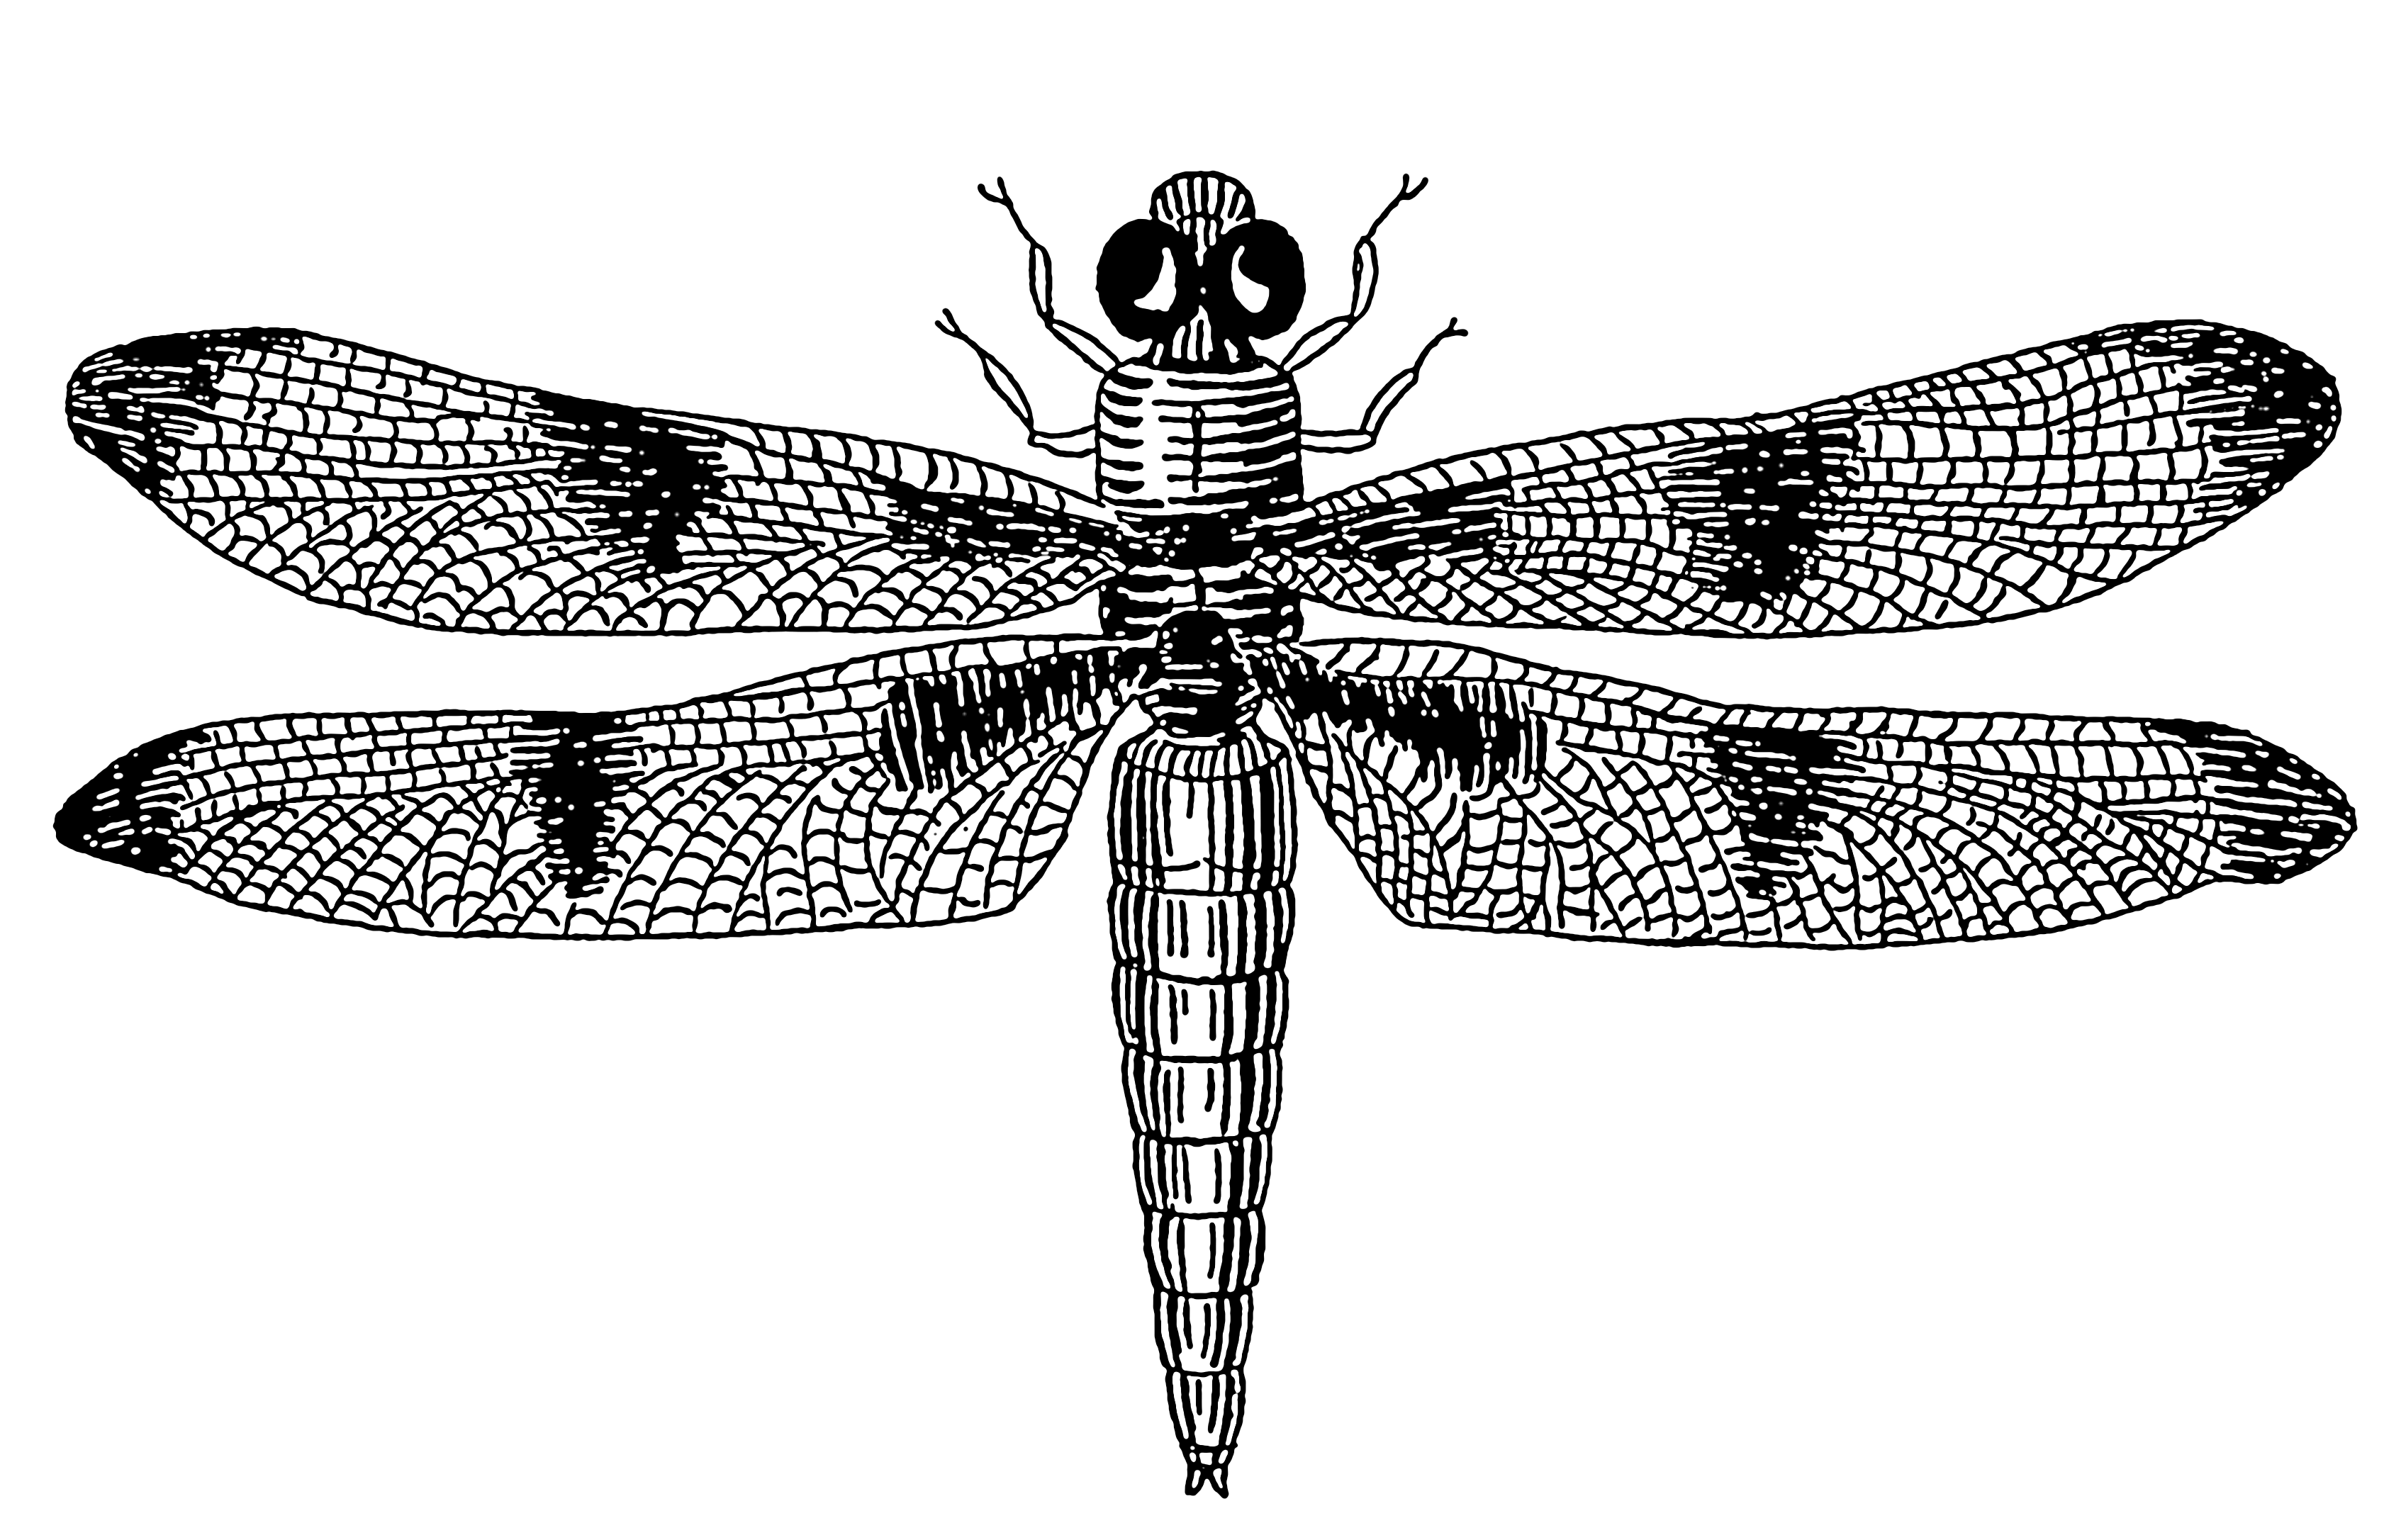 Free Dragonfly Drawings, Download Free Clip Art, Free Clip ...